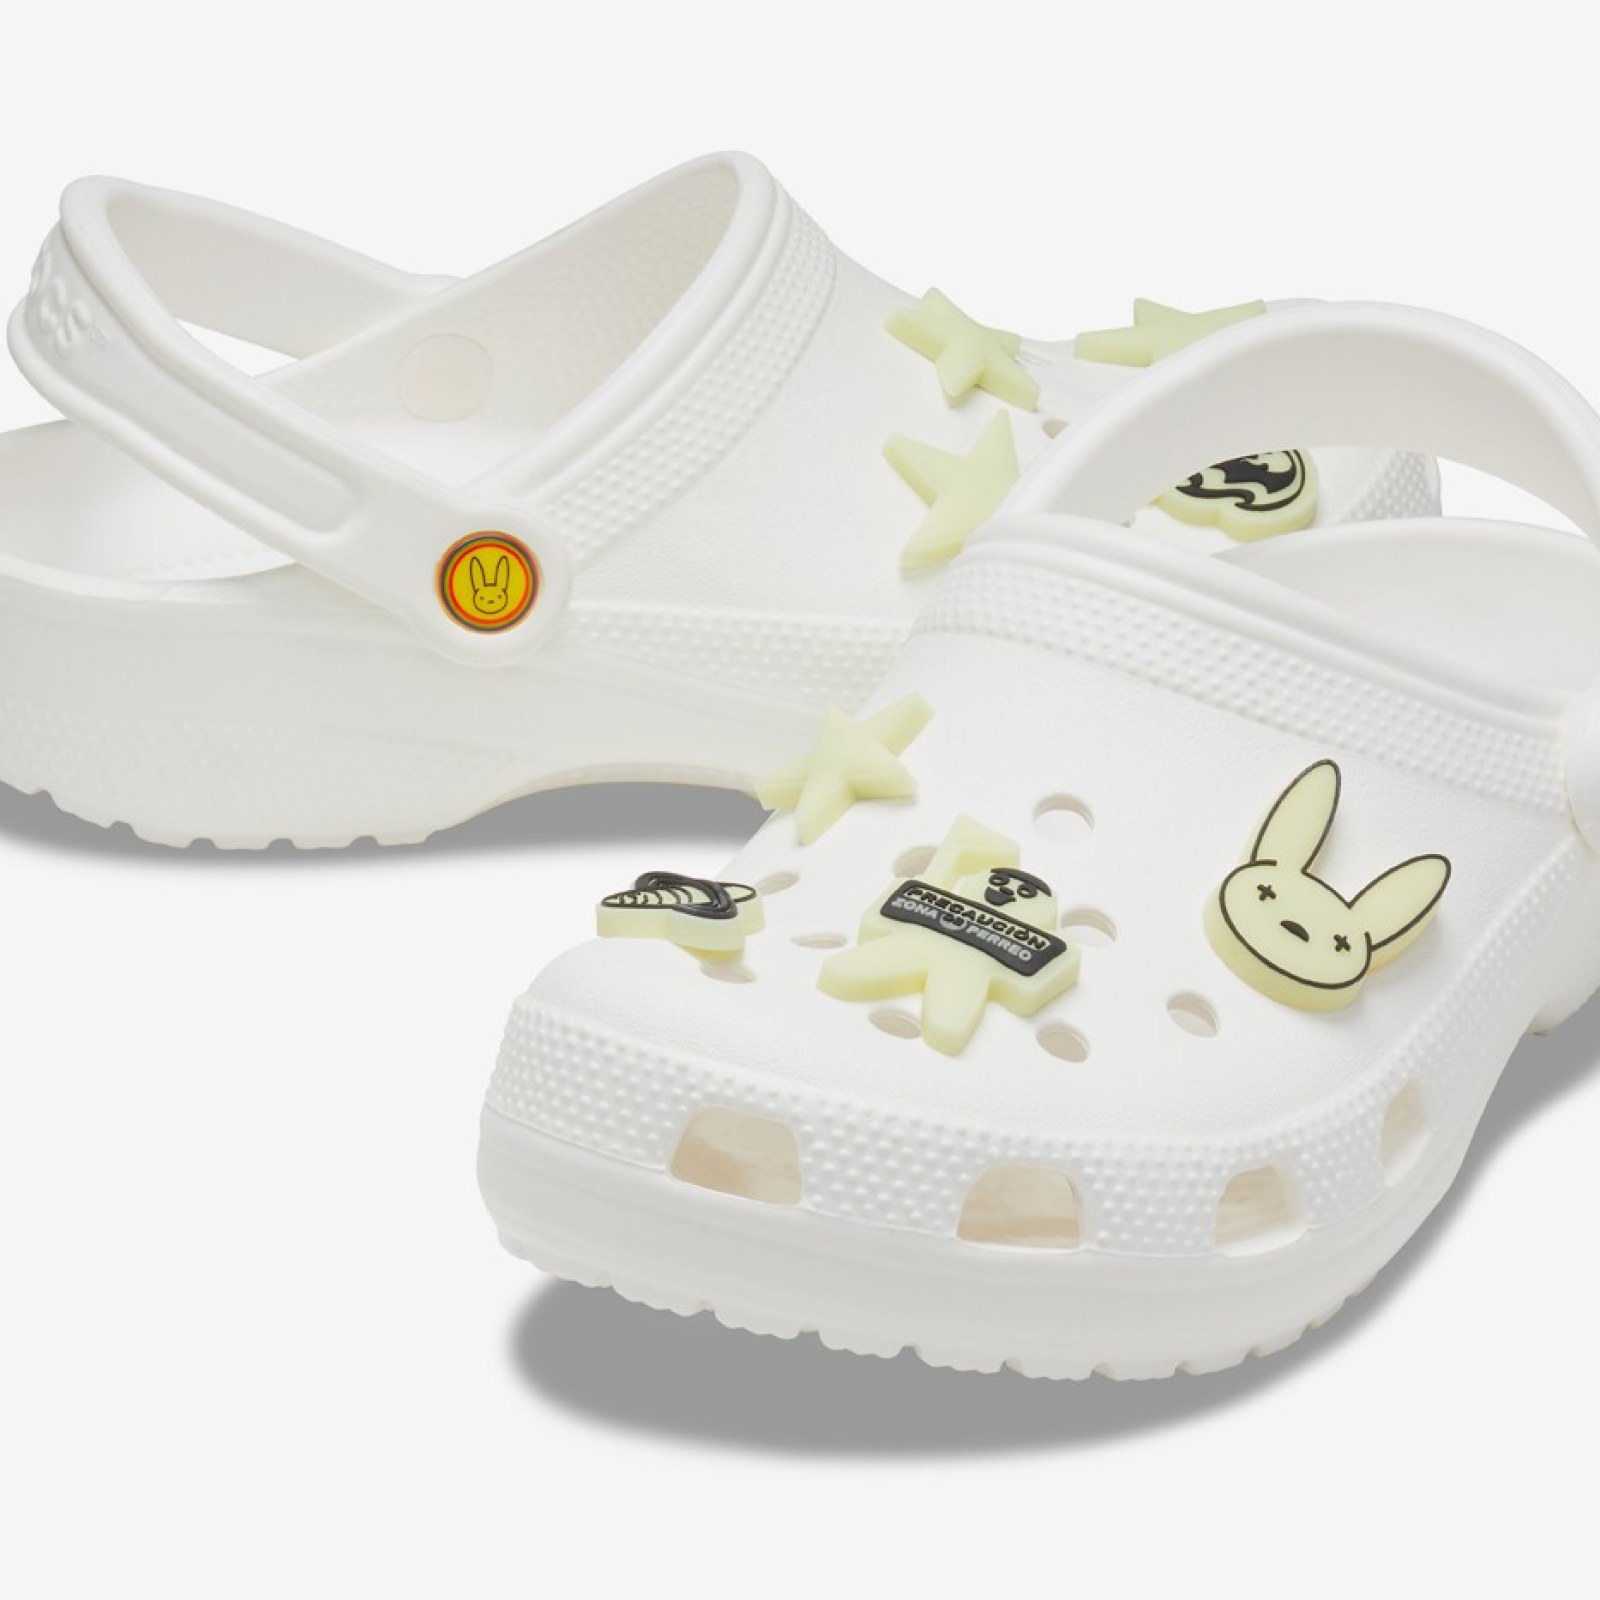 Bad Bunny x Crocs Clogs Price, Release Date Where to Buy